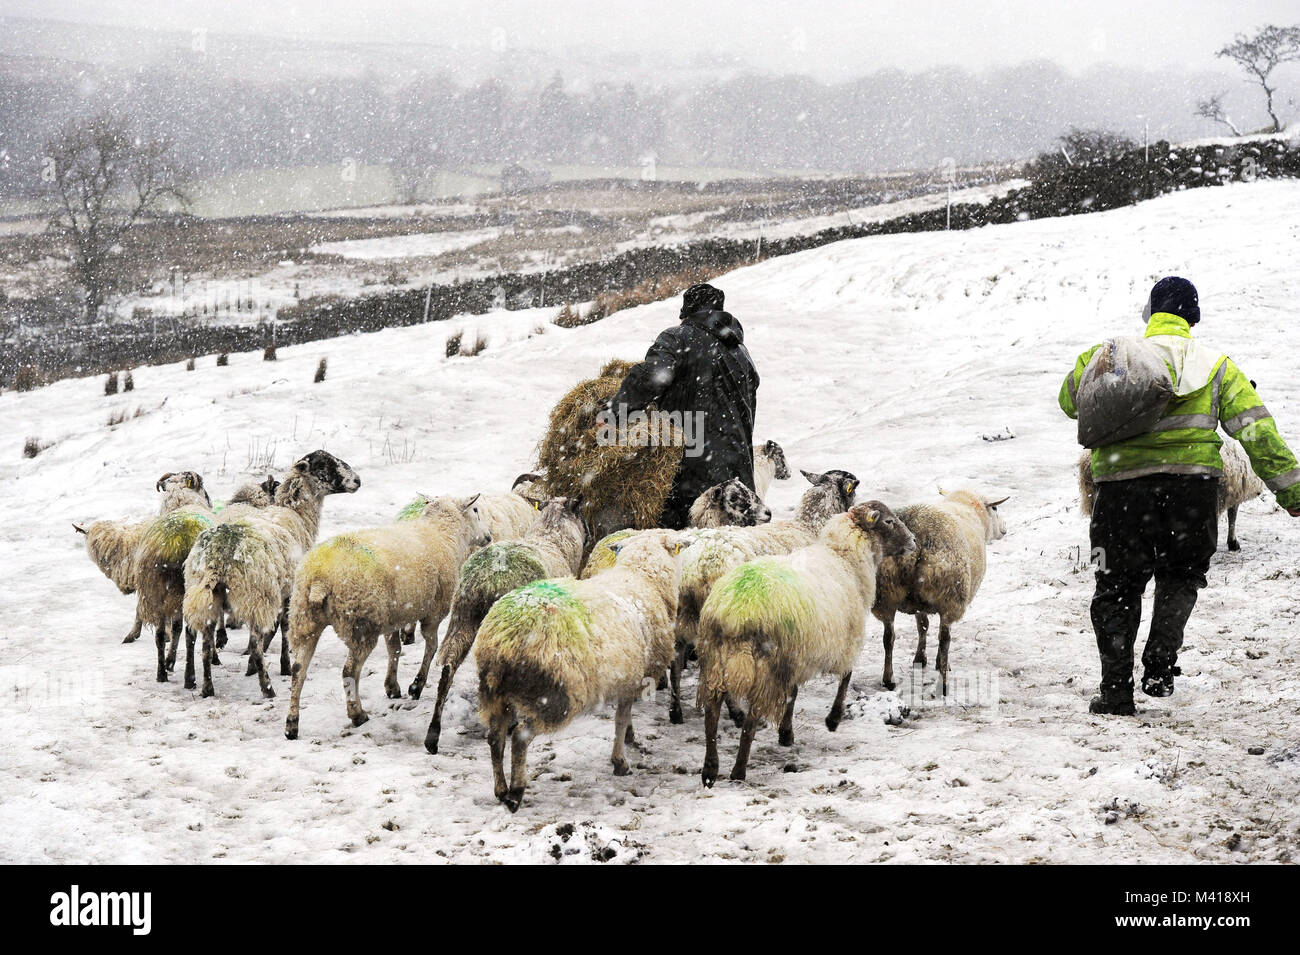 Yorkshire Dales farmer Andrew Coates (left) brings feed in heavy snow to some of the two and a half thousand sheep he looks after on the fells between Hawes and Garsdale, North Yorkshire, as forecasters have issued a series of yellow weather warnings which affect large areas of the country. Stock Photo